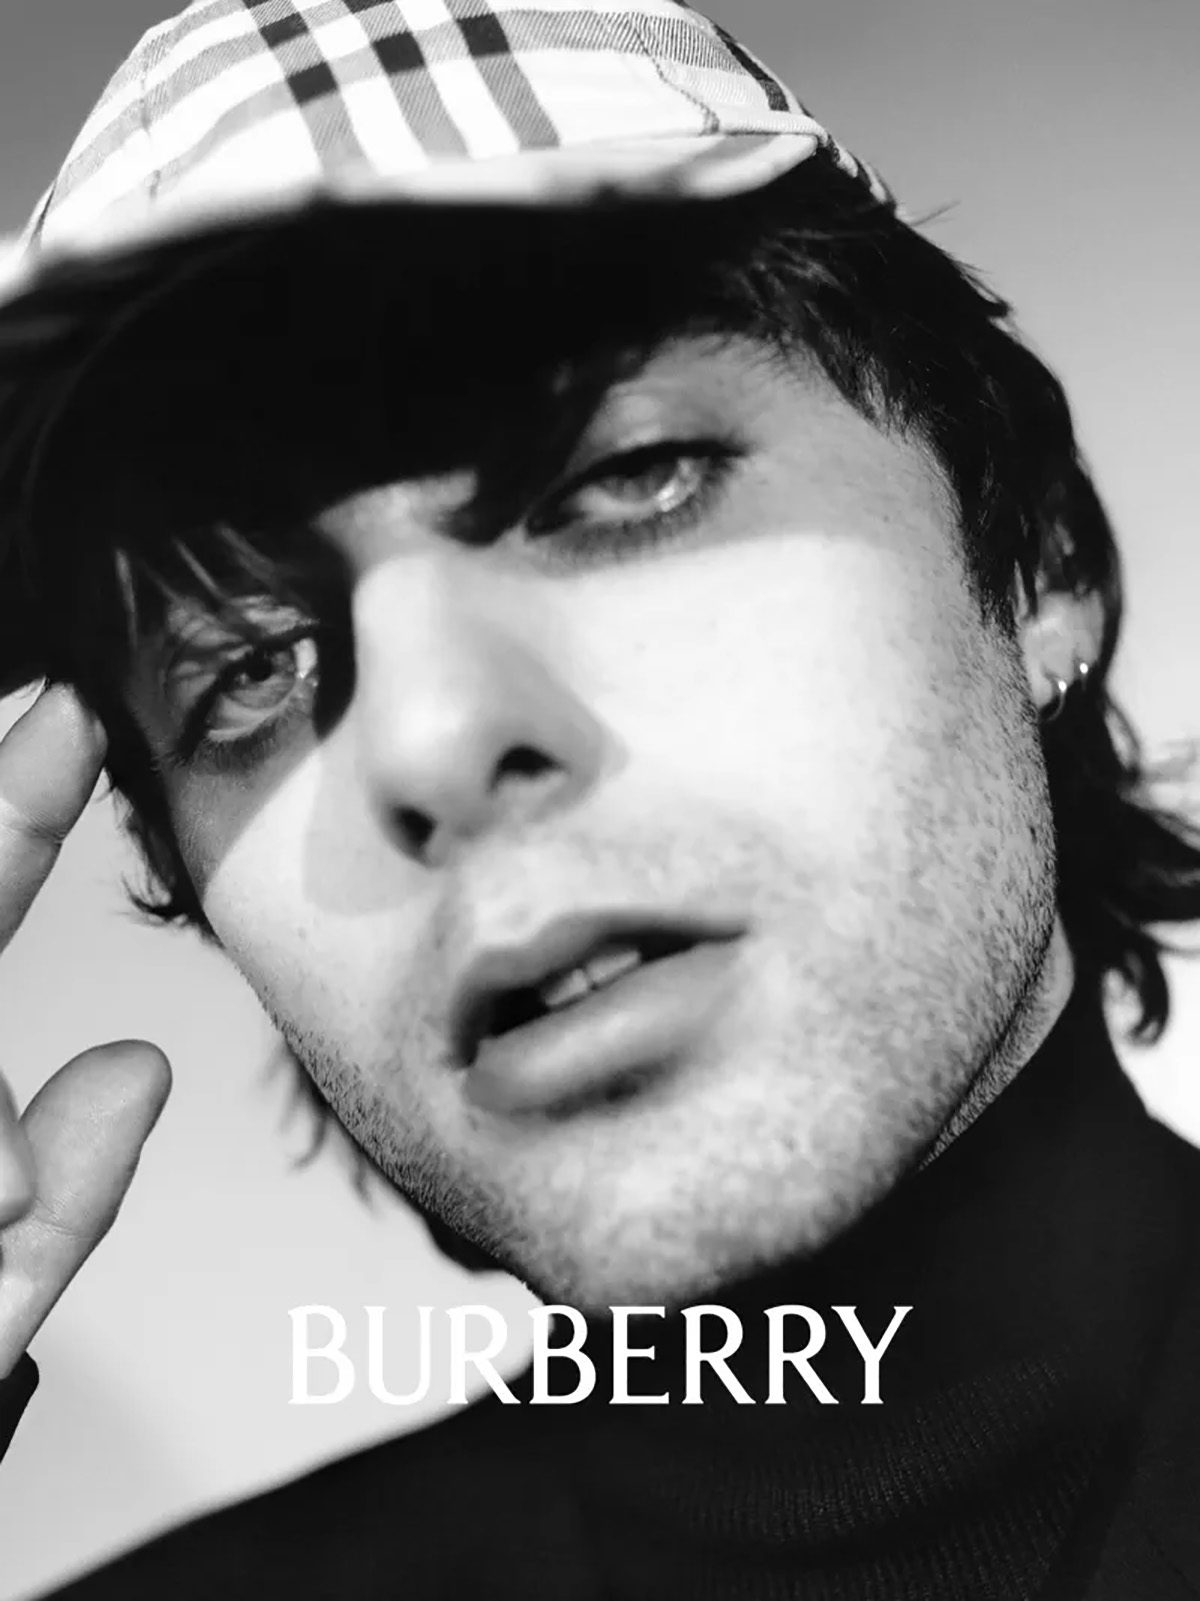 Black and white portrait shot by Tyrone Lebon of Lennon Gallagher wearing a dark roll neck top and a Burberry check cap, next to the new Burberry wordmark